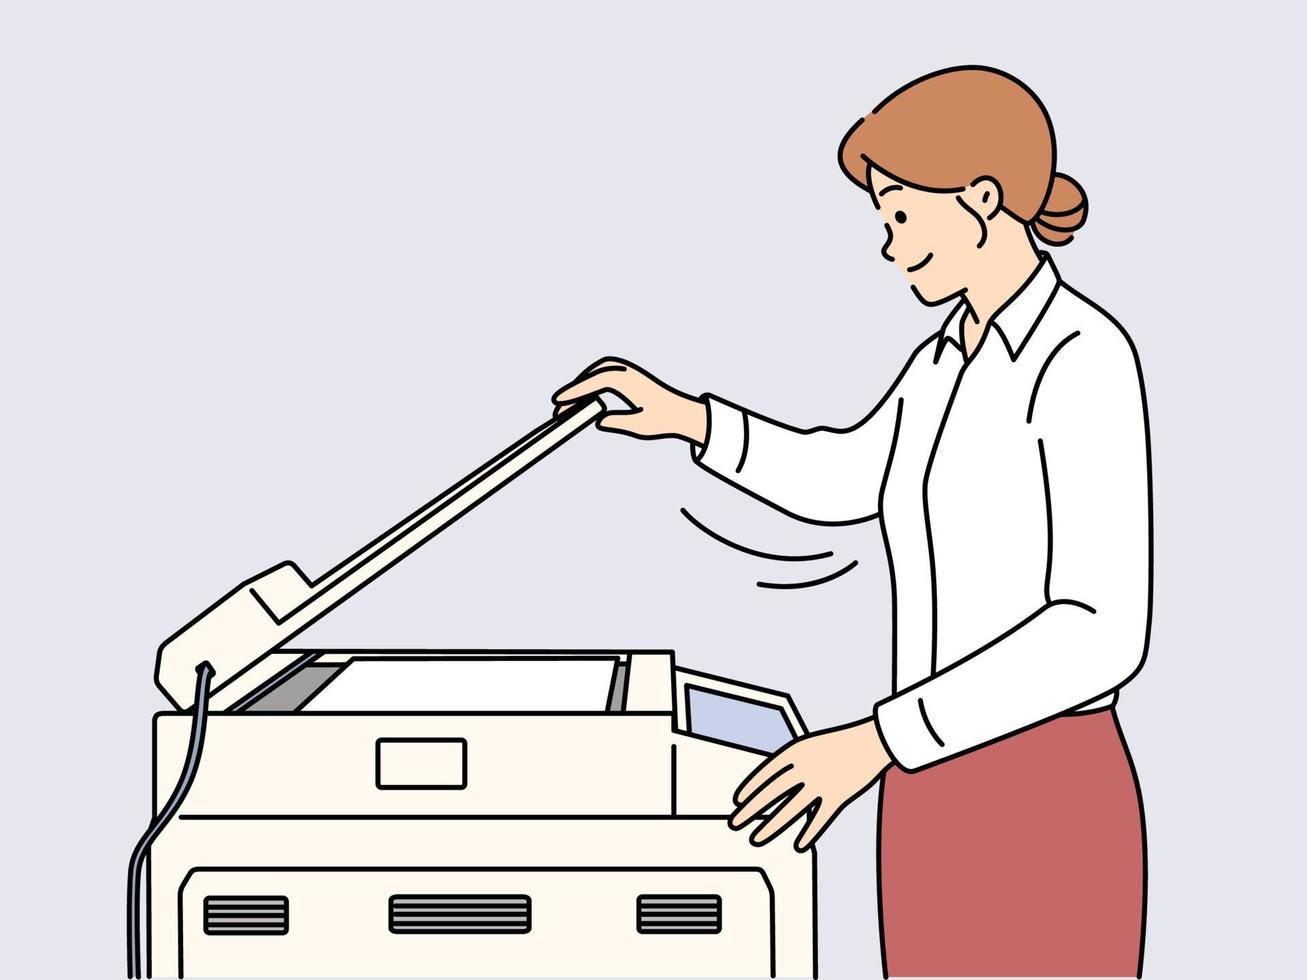 Young businesswoman making document copy on machine in office. Smiling female employee working on printer or photocopy device. Vector illustration.